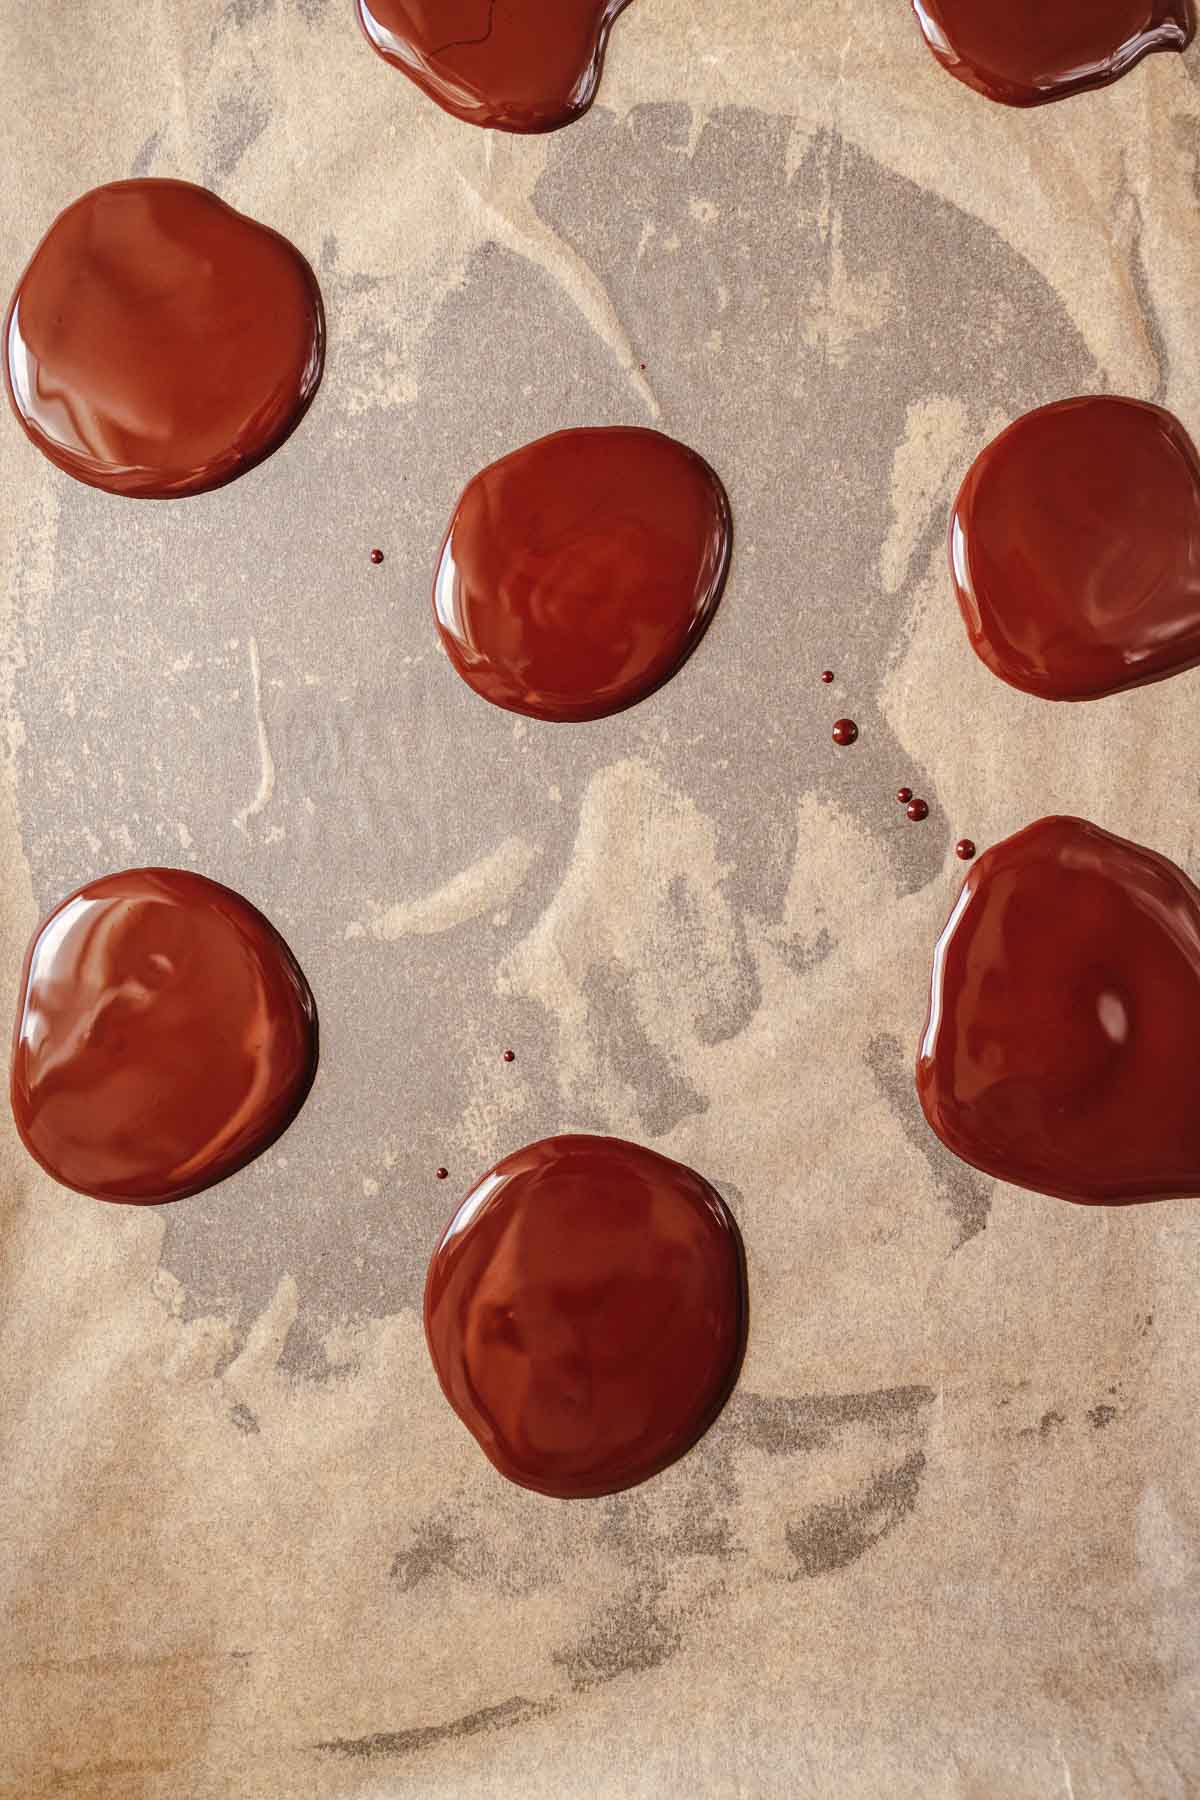 Small puddles of melted chocolate on tan parchment paper.